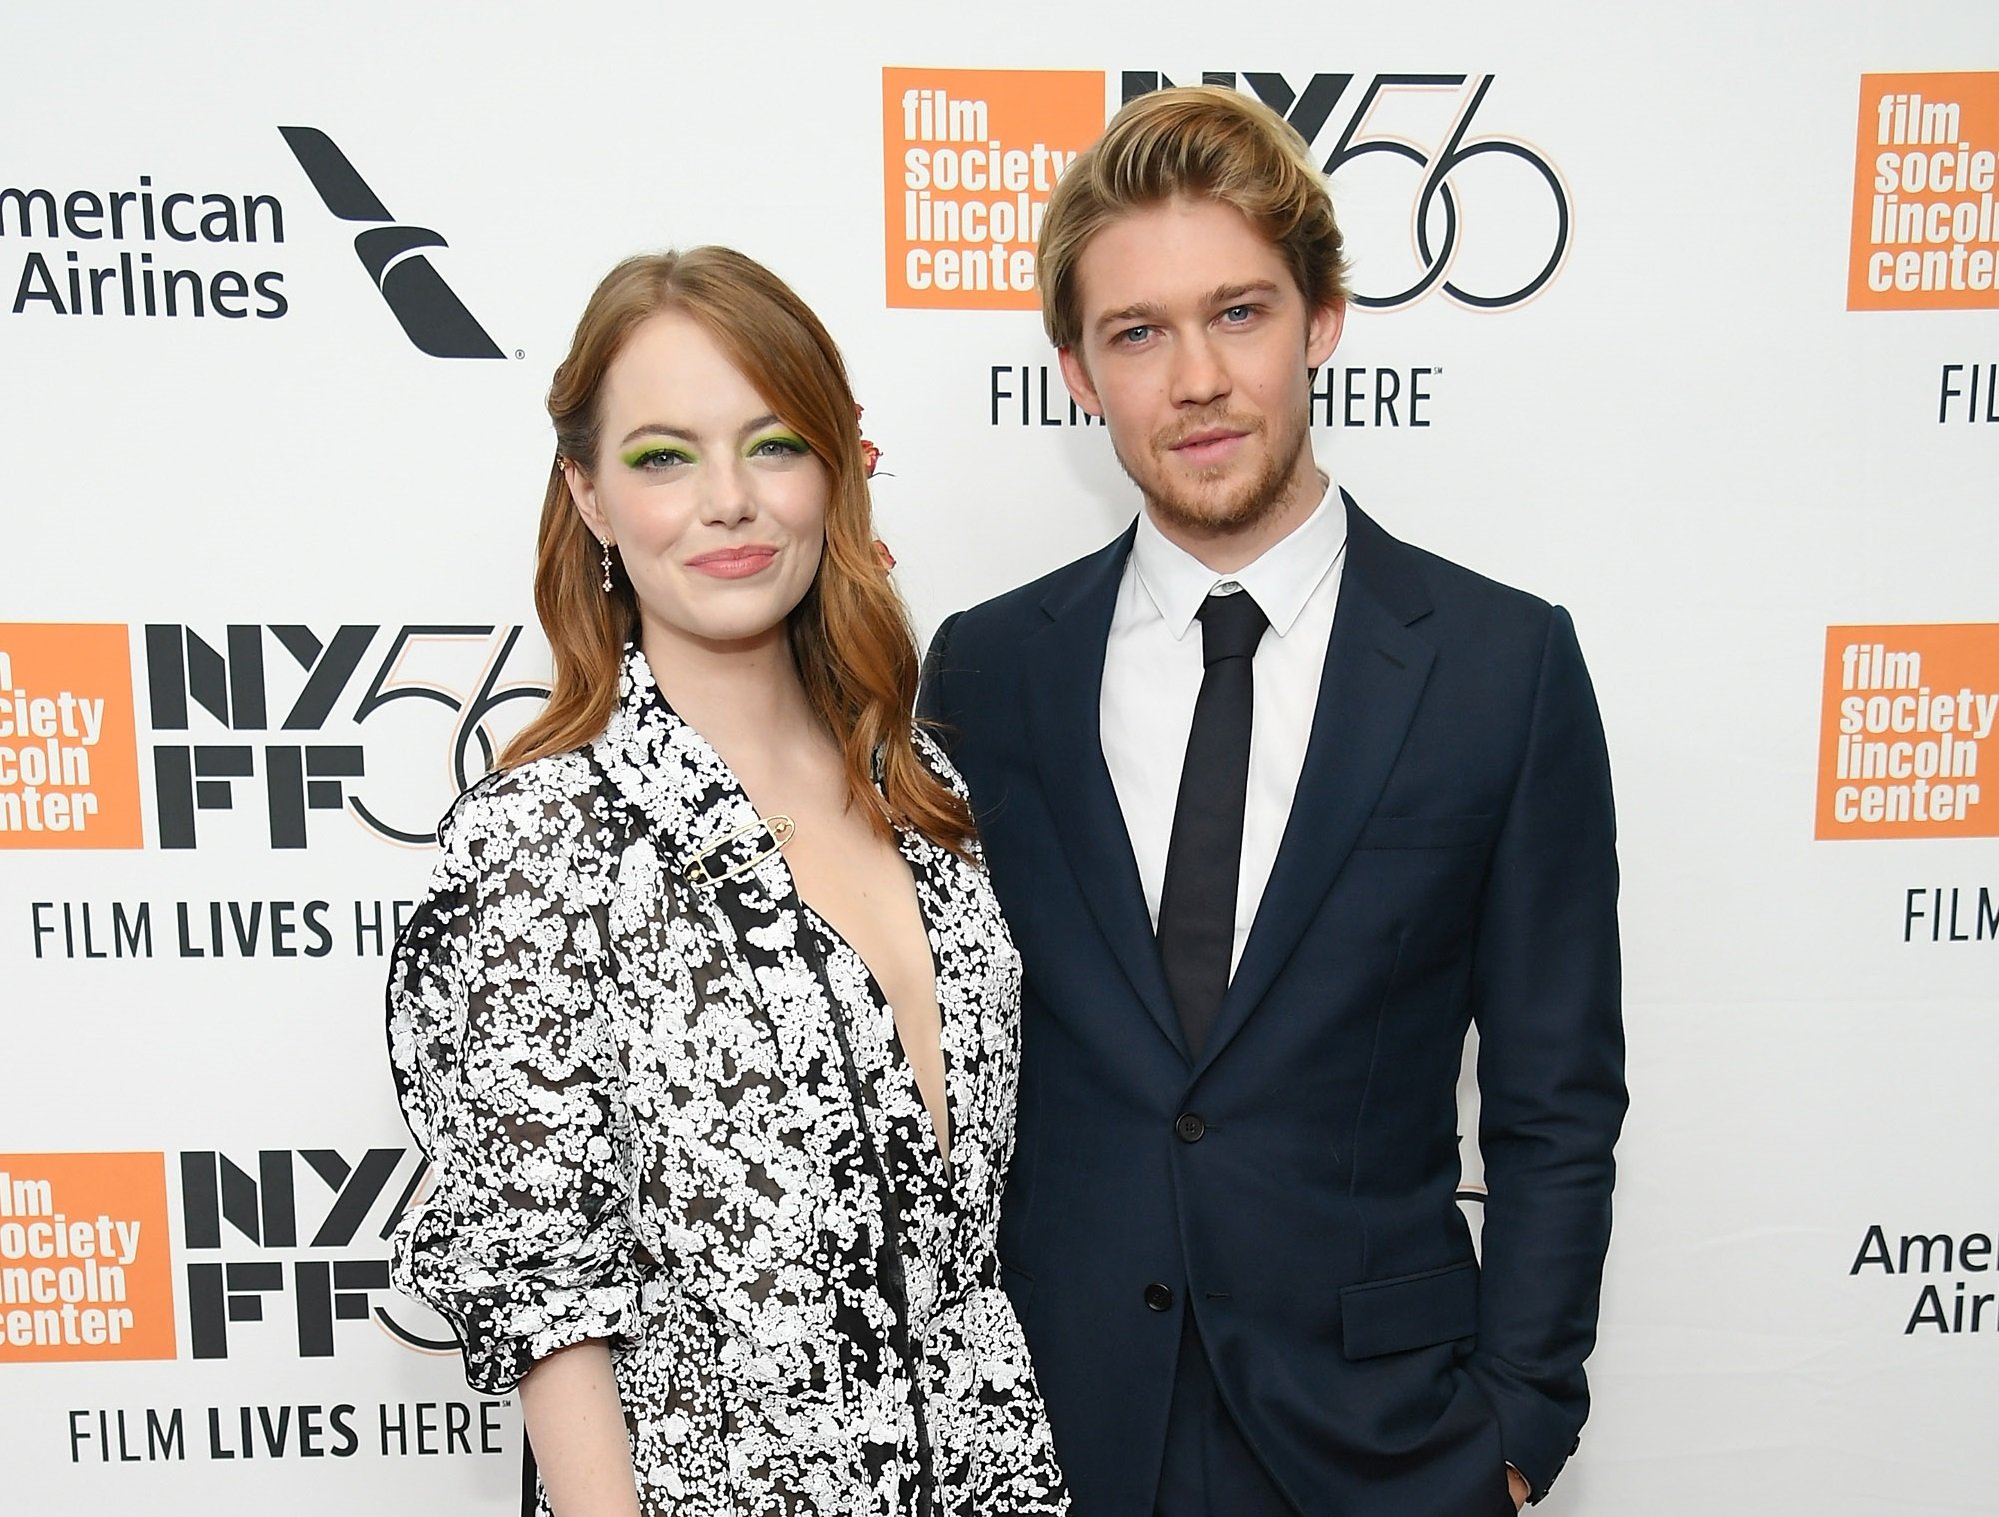 Emma Stone and Joe Alwyn attend the opening night premiere of The Favourite on September 28, 2018, in New York City. 